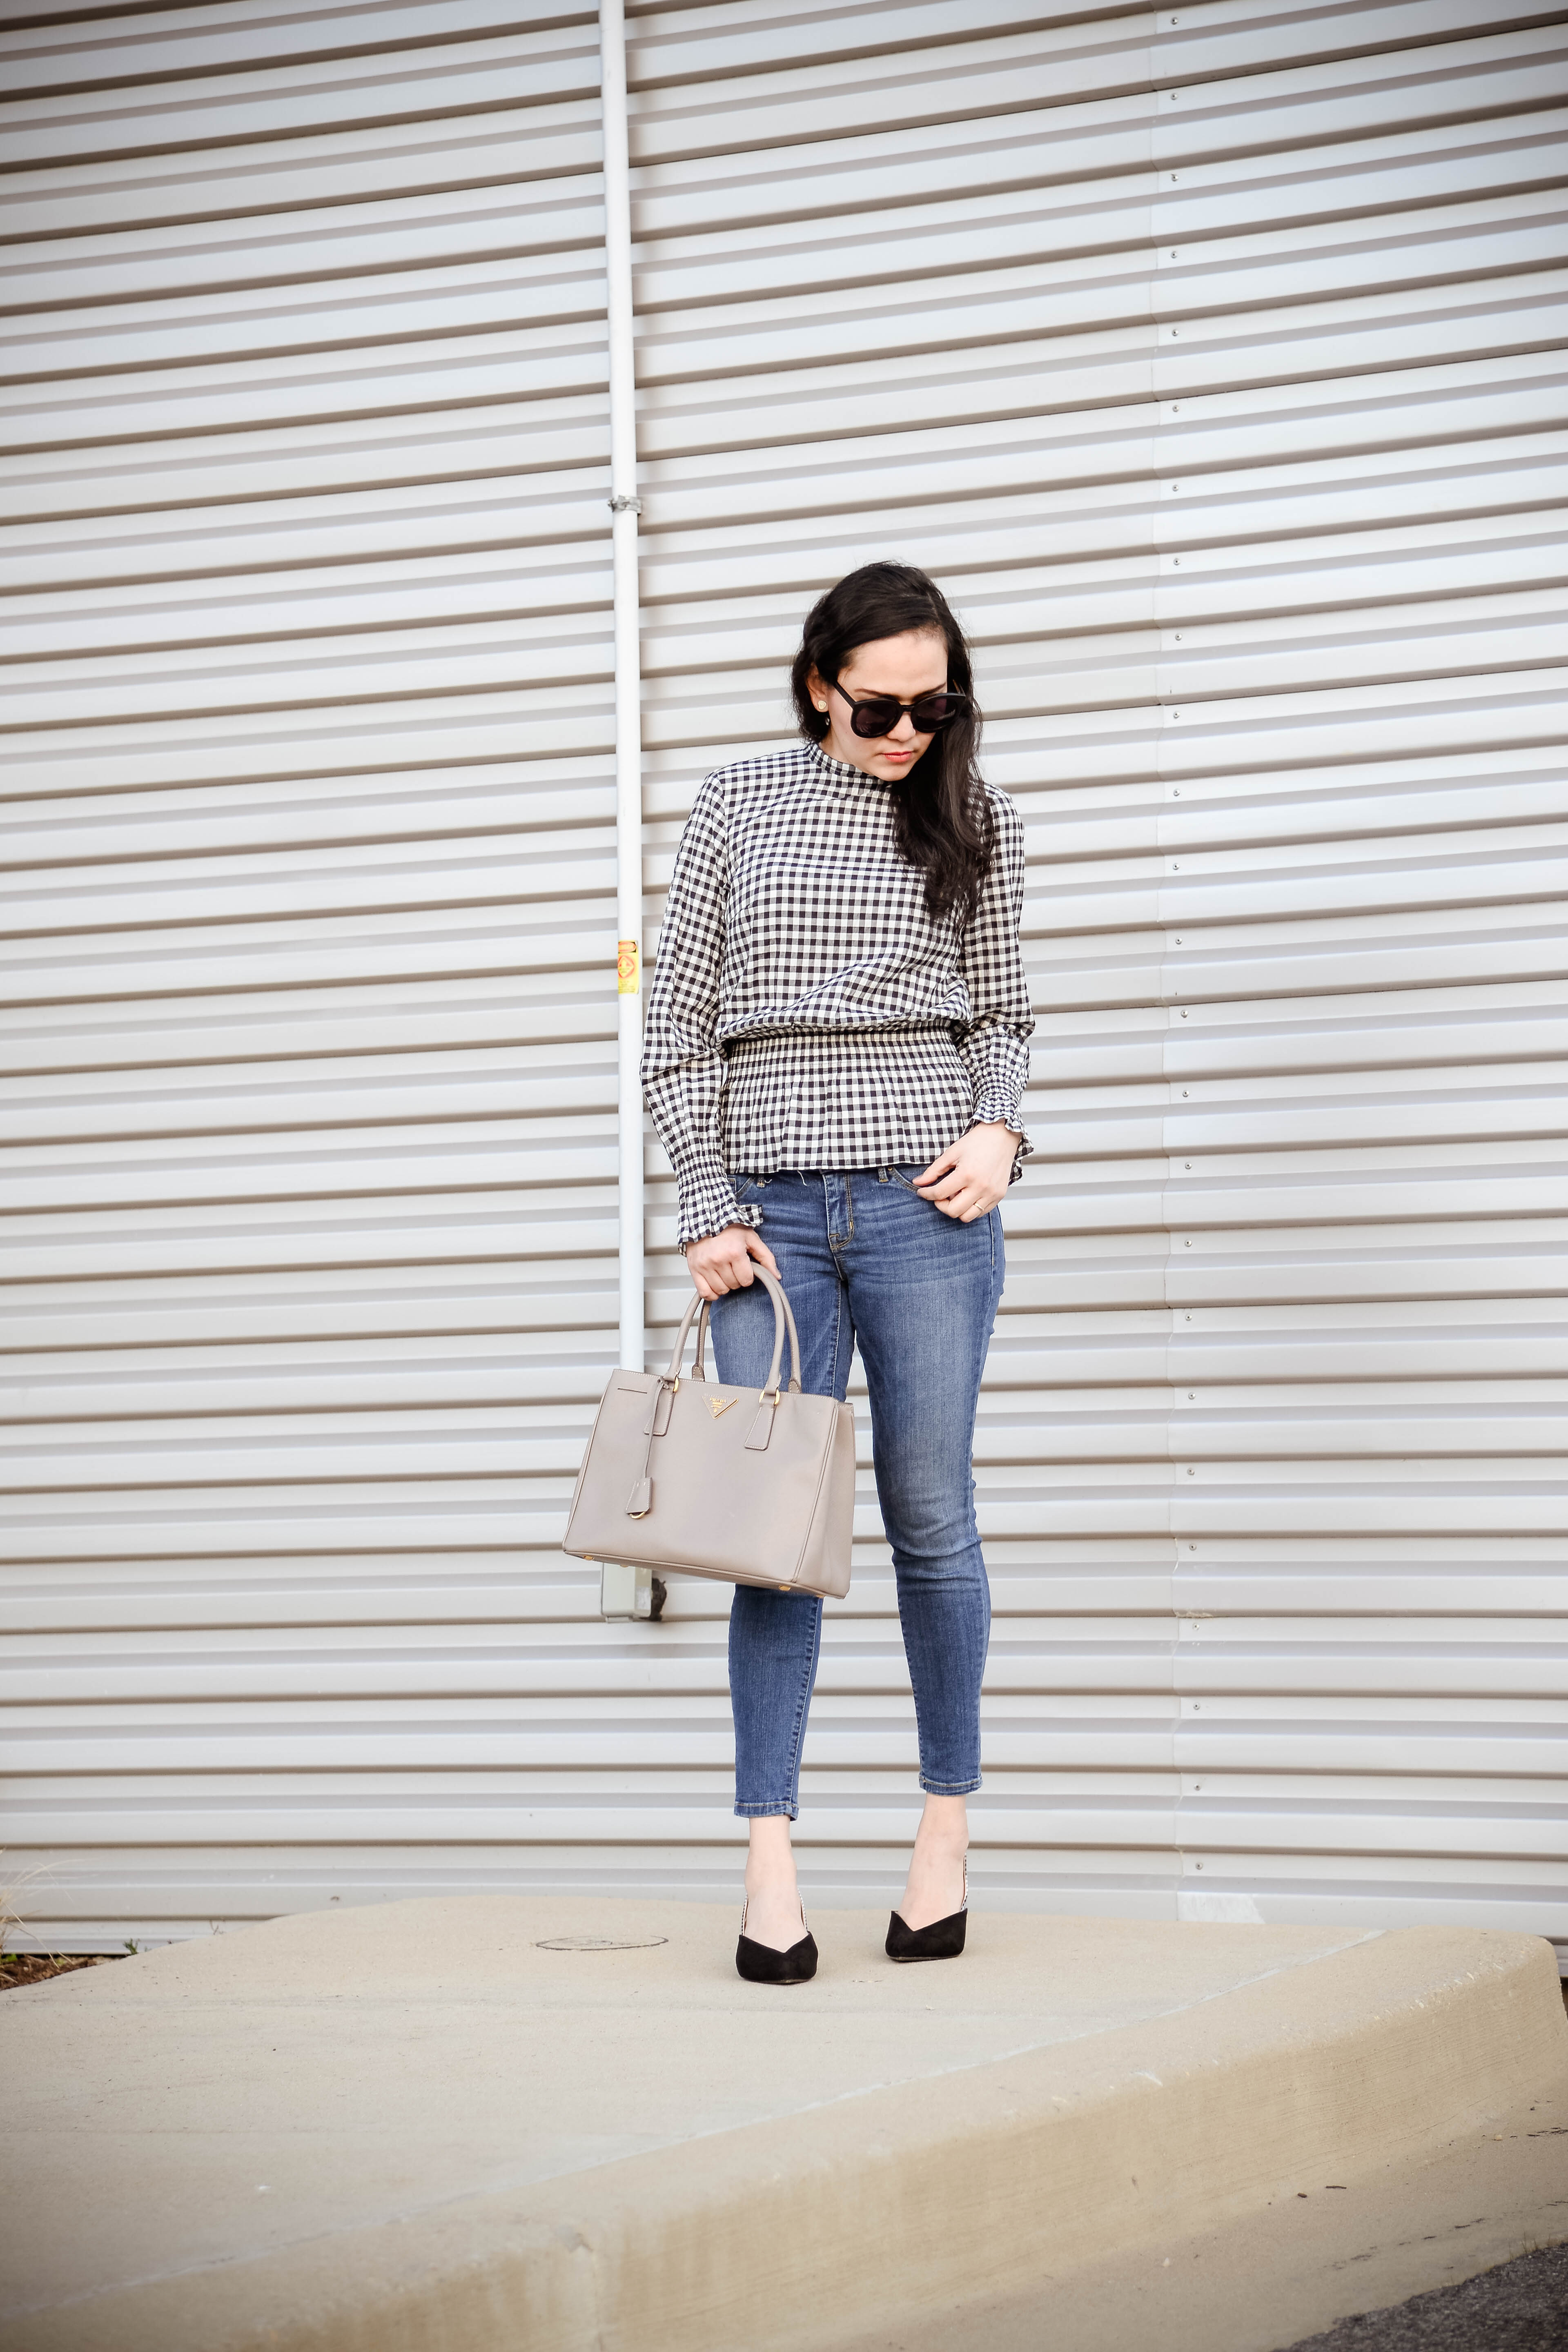 Gingham Style All the Way